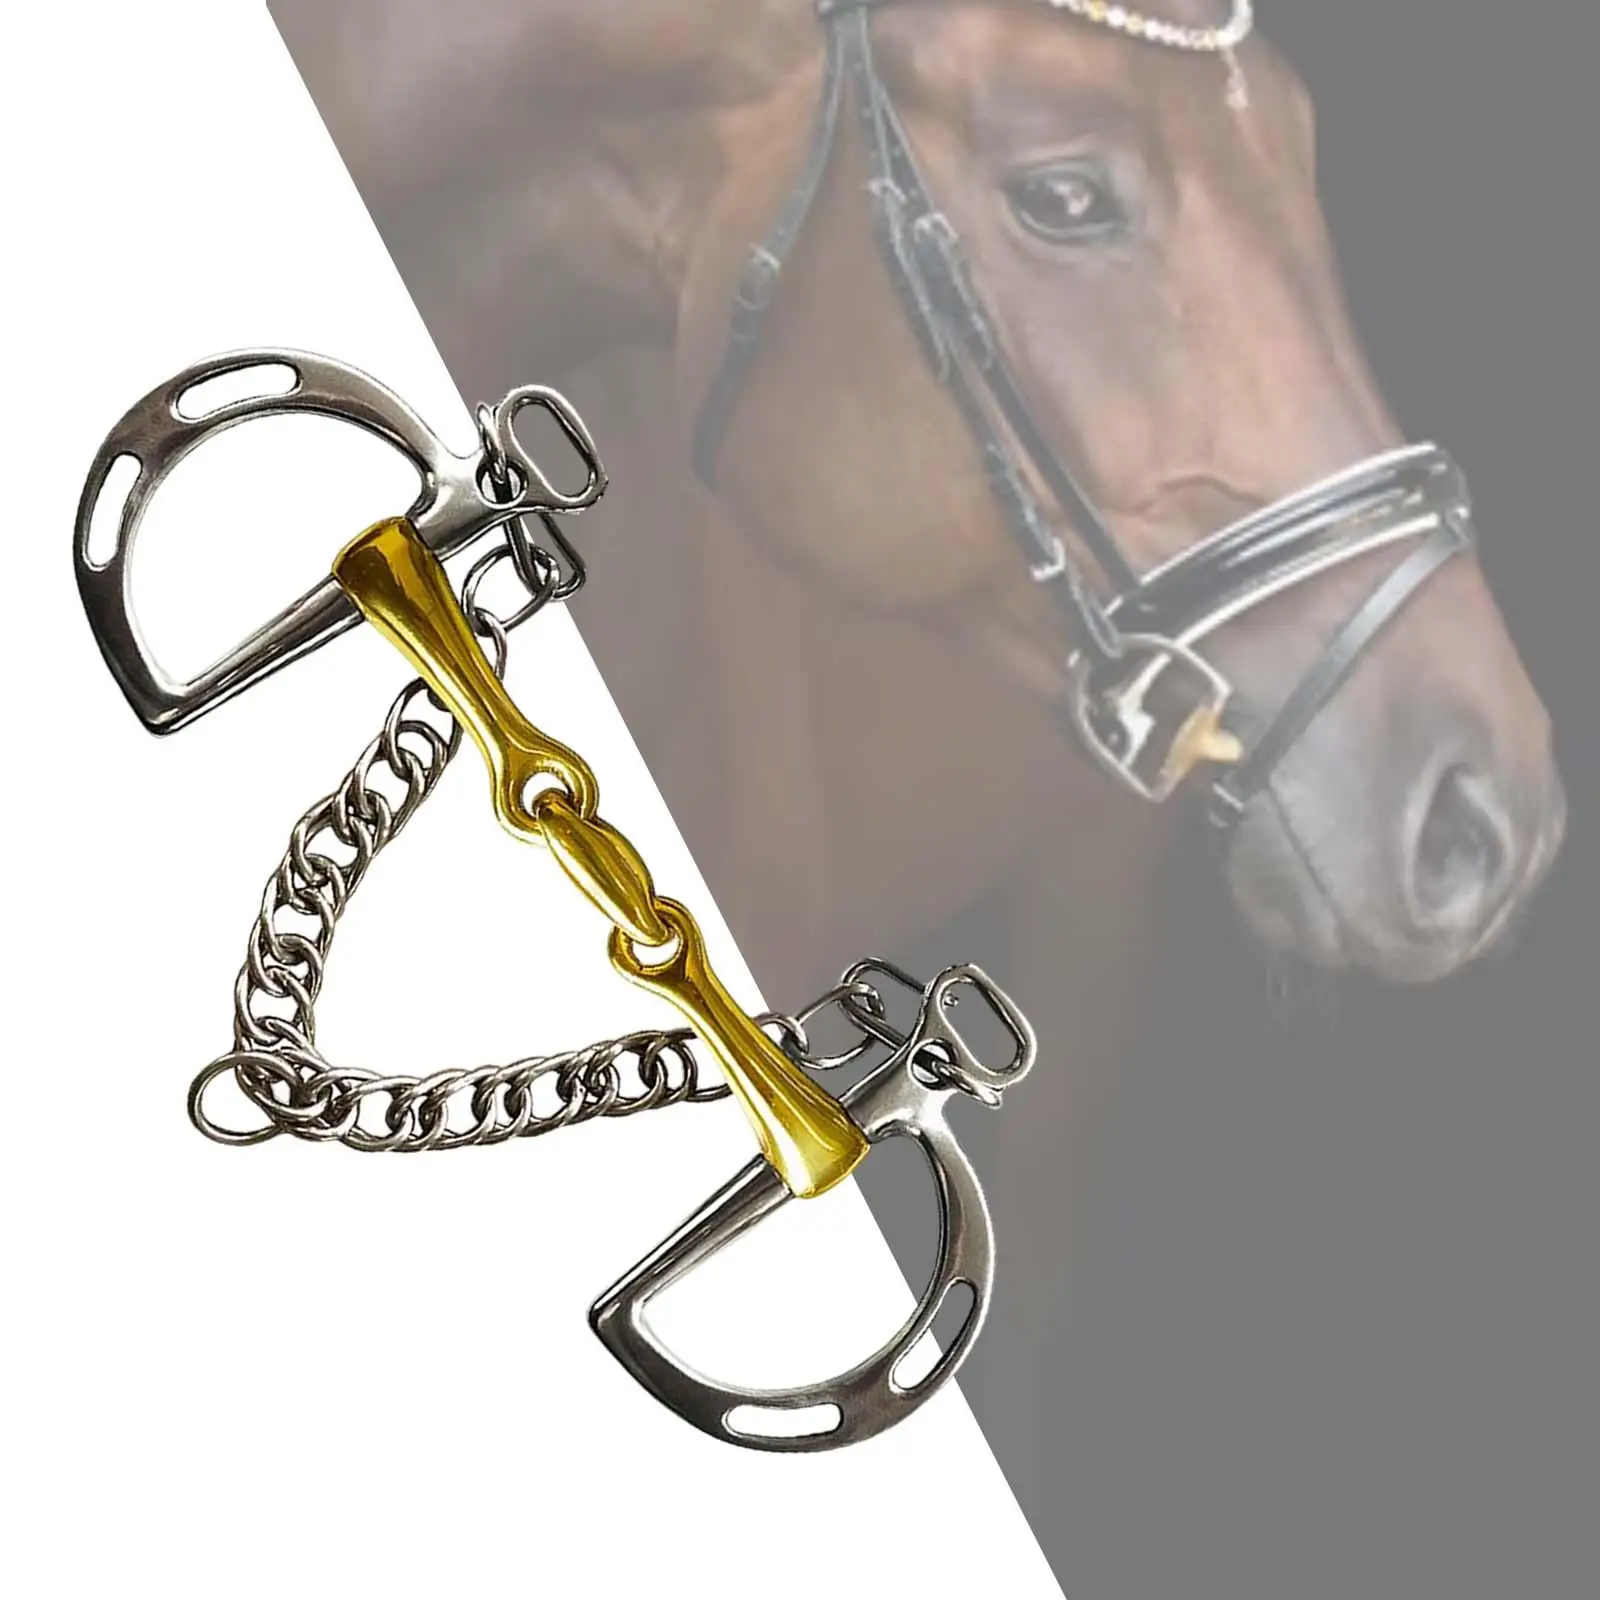 Horse Bit Copper Mouth Copper Roller with Curb Hooks Chain Cheek Stainless Steel